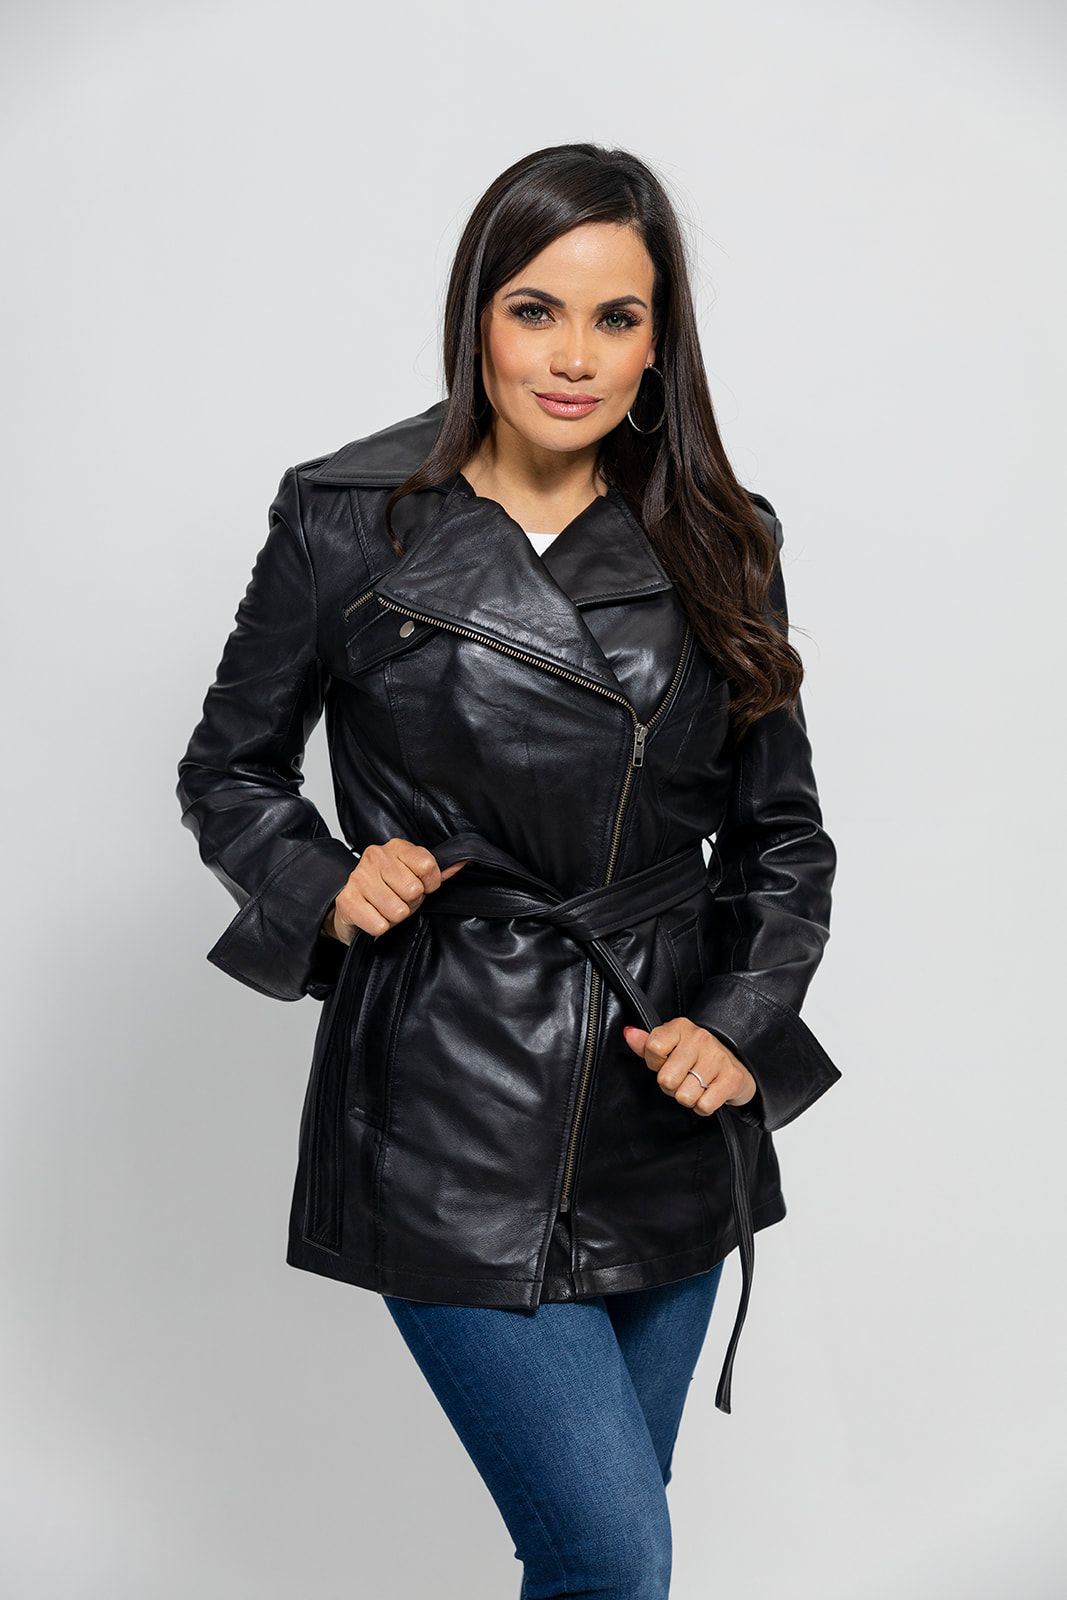 First Manufacturing Traci Ladies Jacket